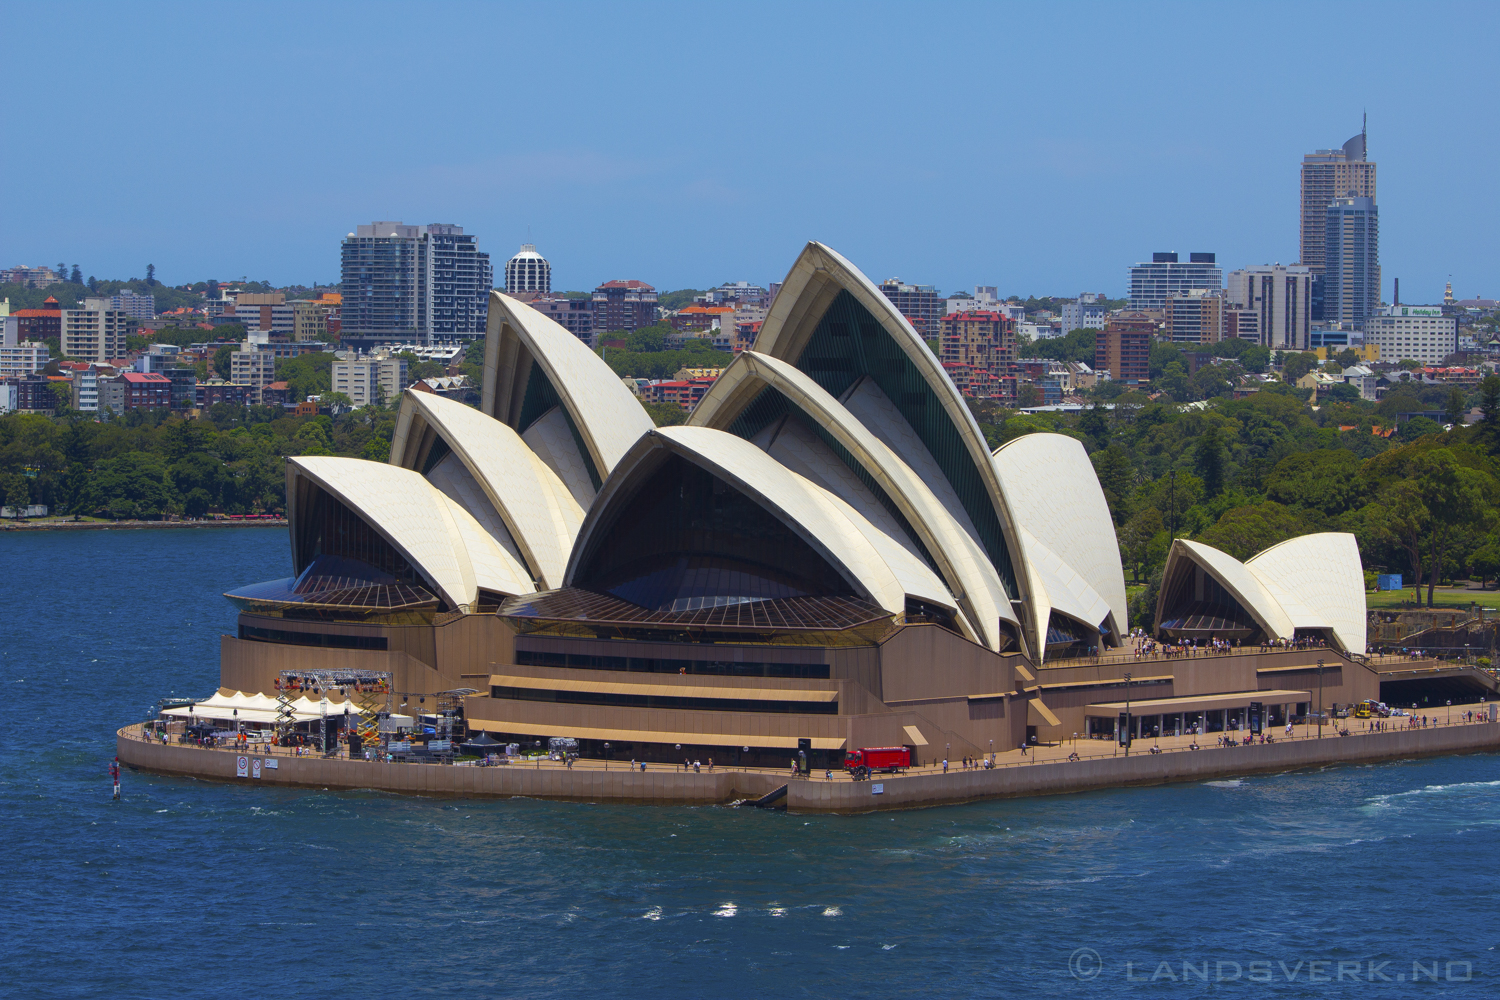 Sydney Opera House, New South Wales. 

(Canon EOS 550D / Sigma 70-200mm F2.8 OS)